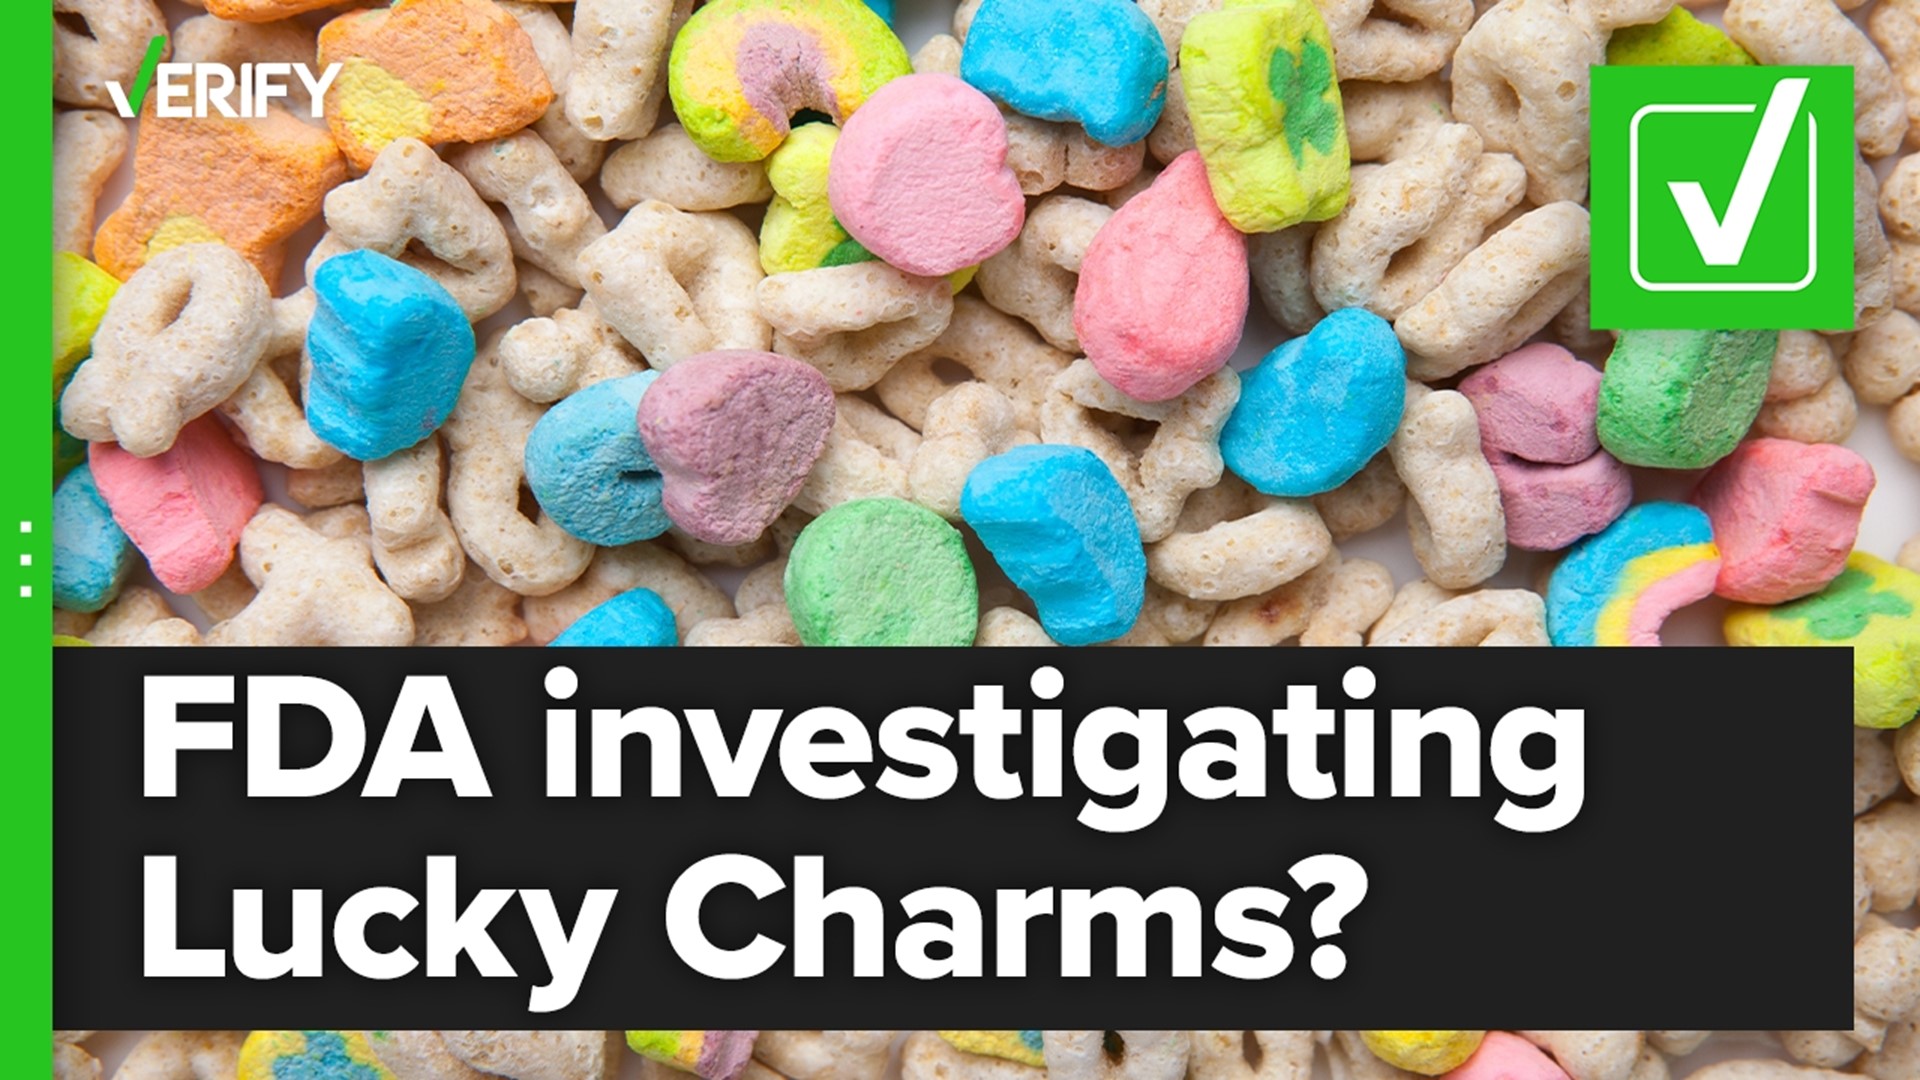 FDA investigating Lucky Charms sickness claims, no recall yet